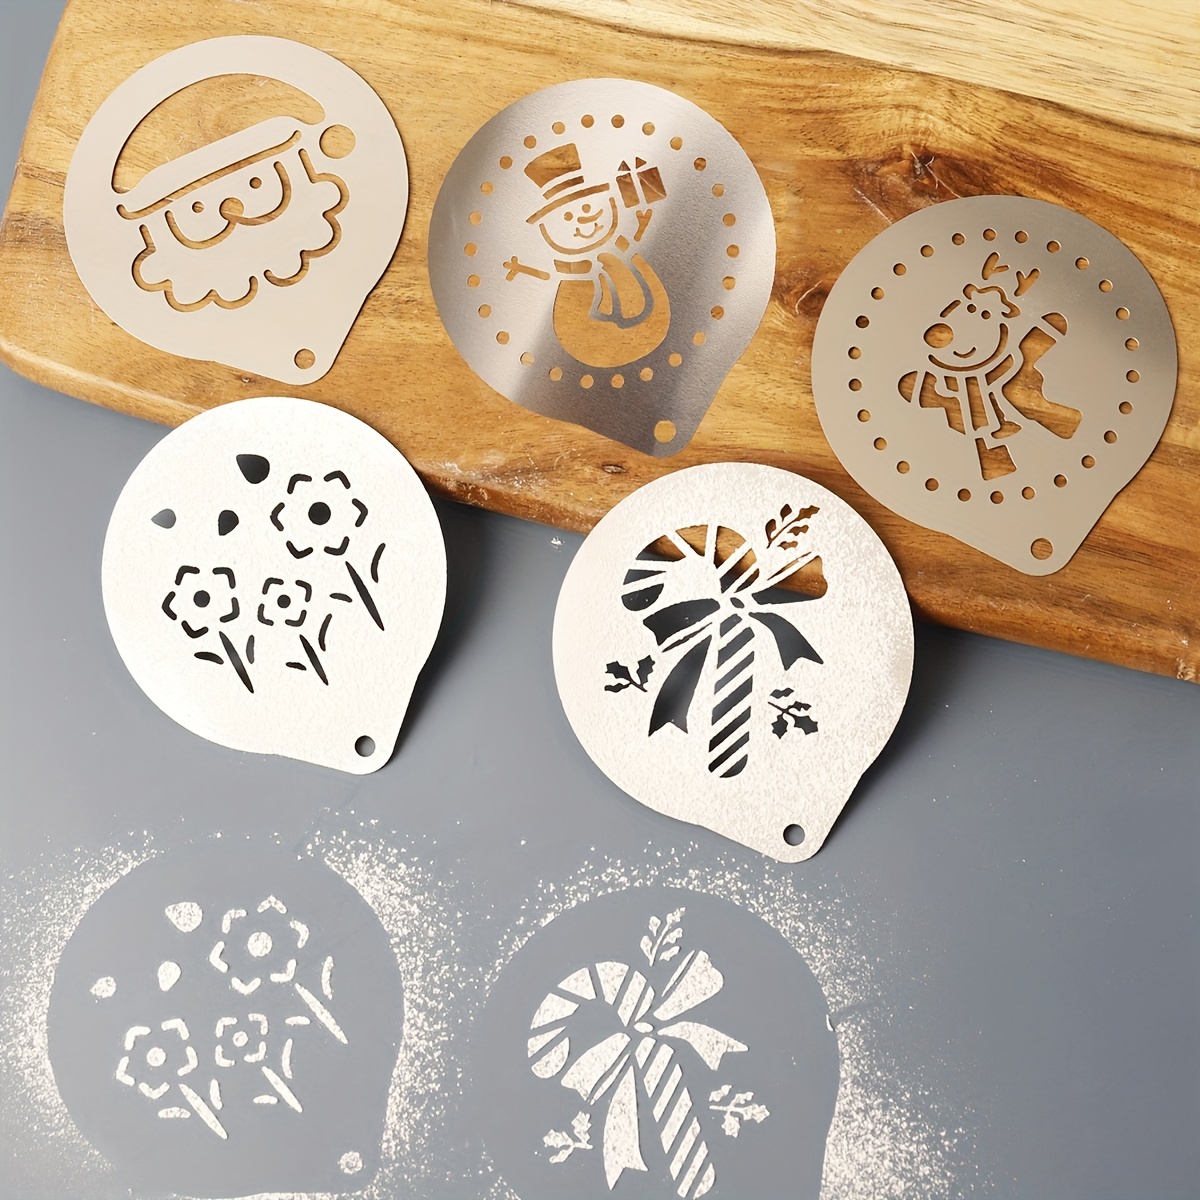 5Pcs Stainless Steel Coffee Stencils Latte Art, Coffee Decorating Stencils,  Cappuccino Chocolate Arts Templates, Cake Decorating Tool for Mousse, Hot